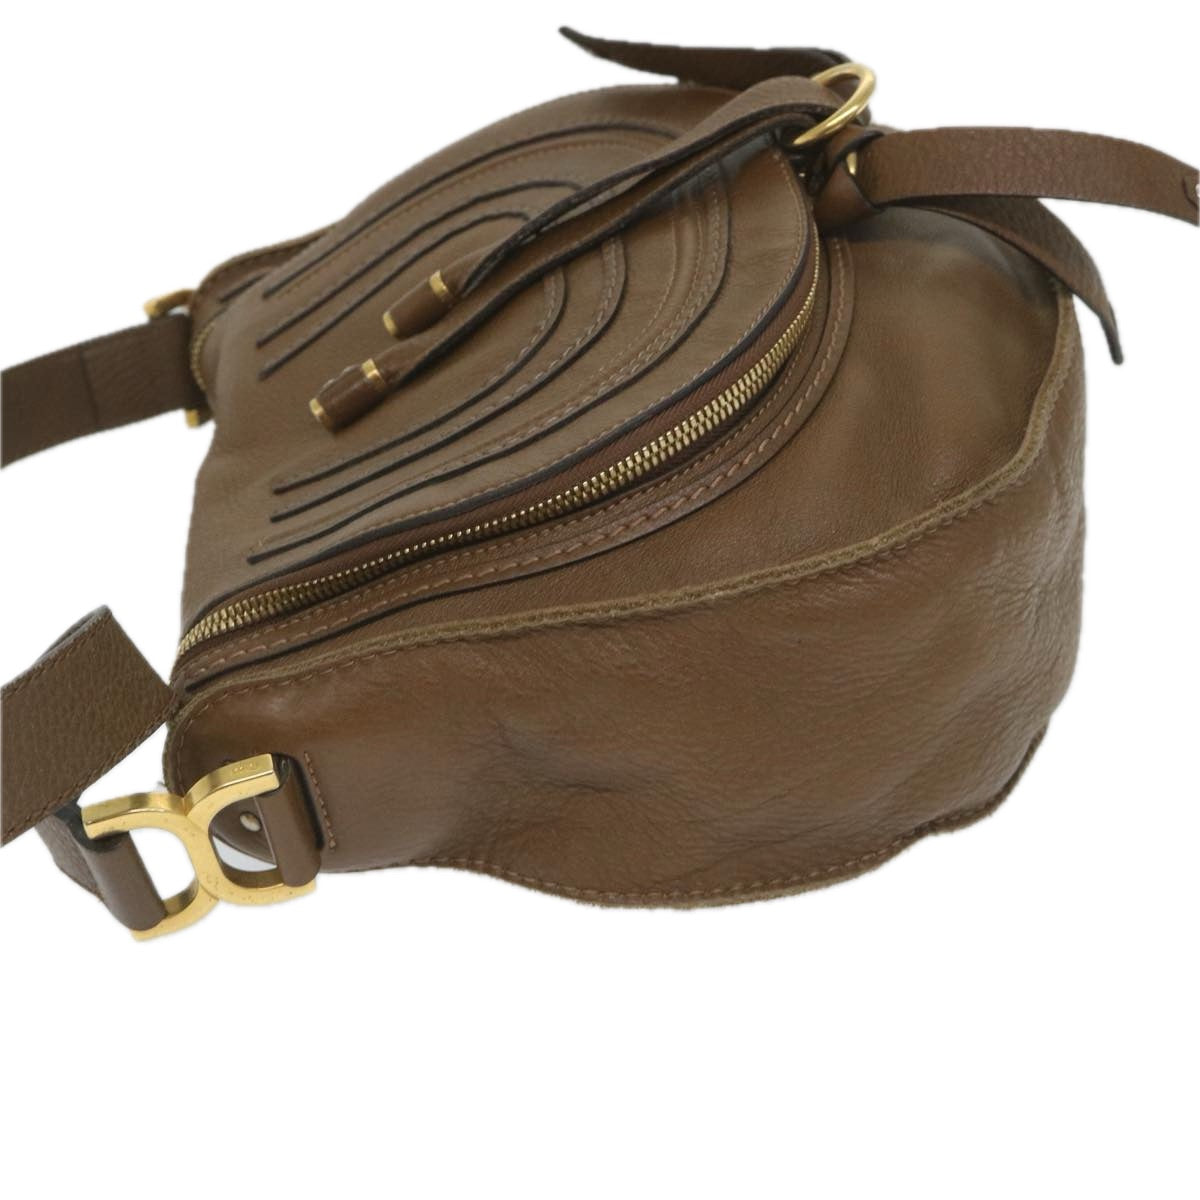 Chloe Mercy Shoulder Bag Leather Brown Auth 58160